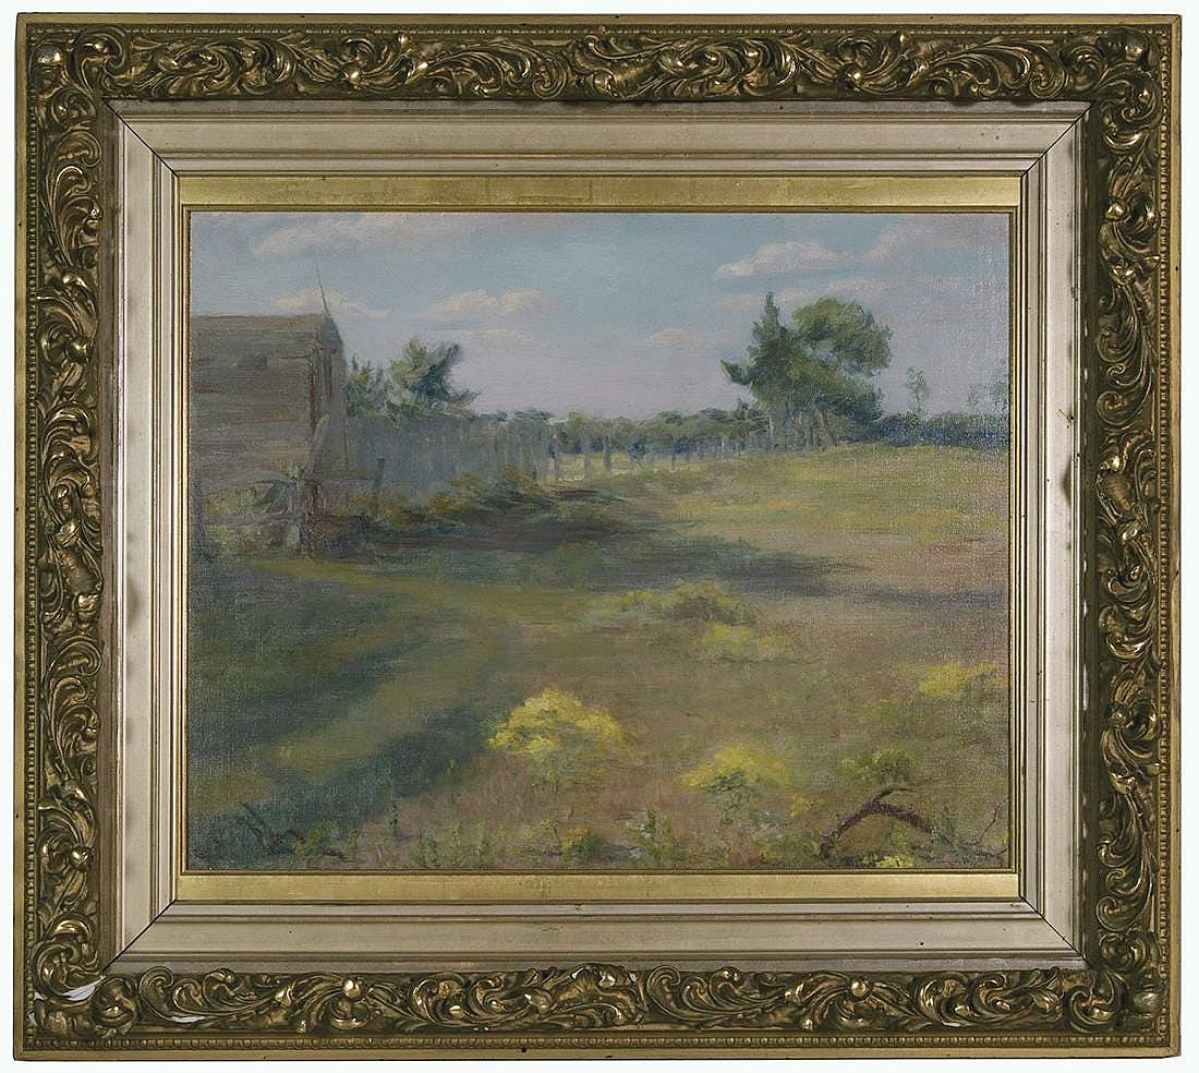 One of the higher prices in the sale was achieved by this Ernest Lawson landscape. It was said to be a Connecticut farm scene and reached $6,250.